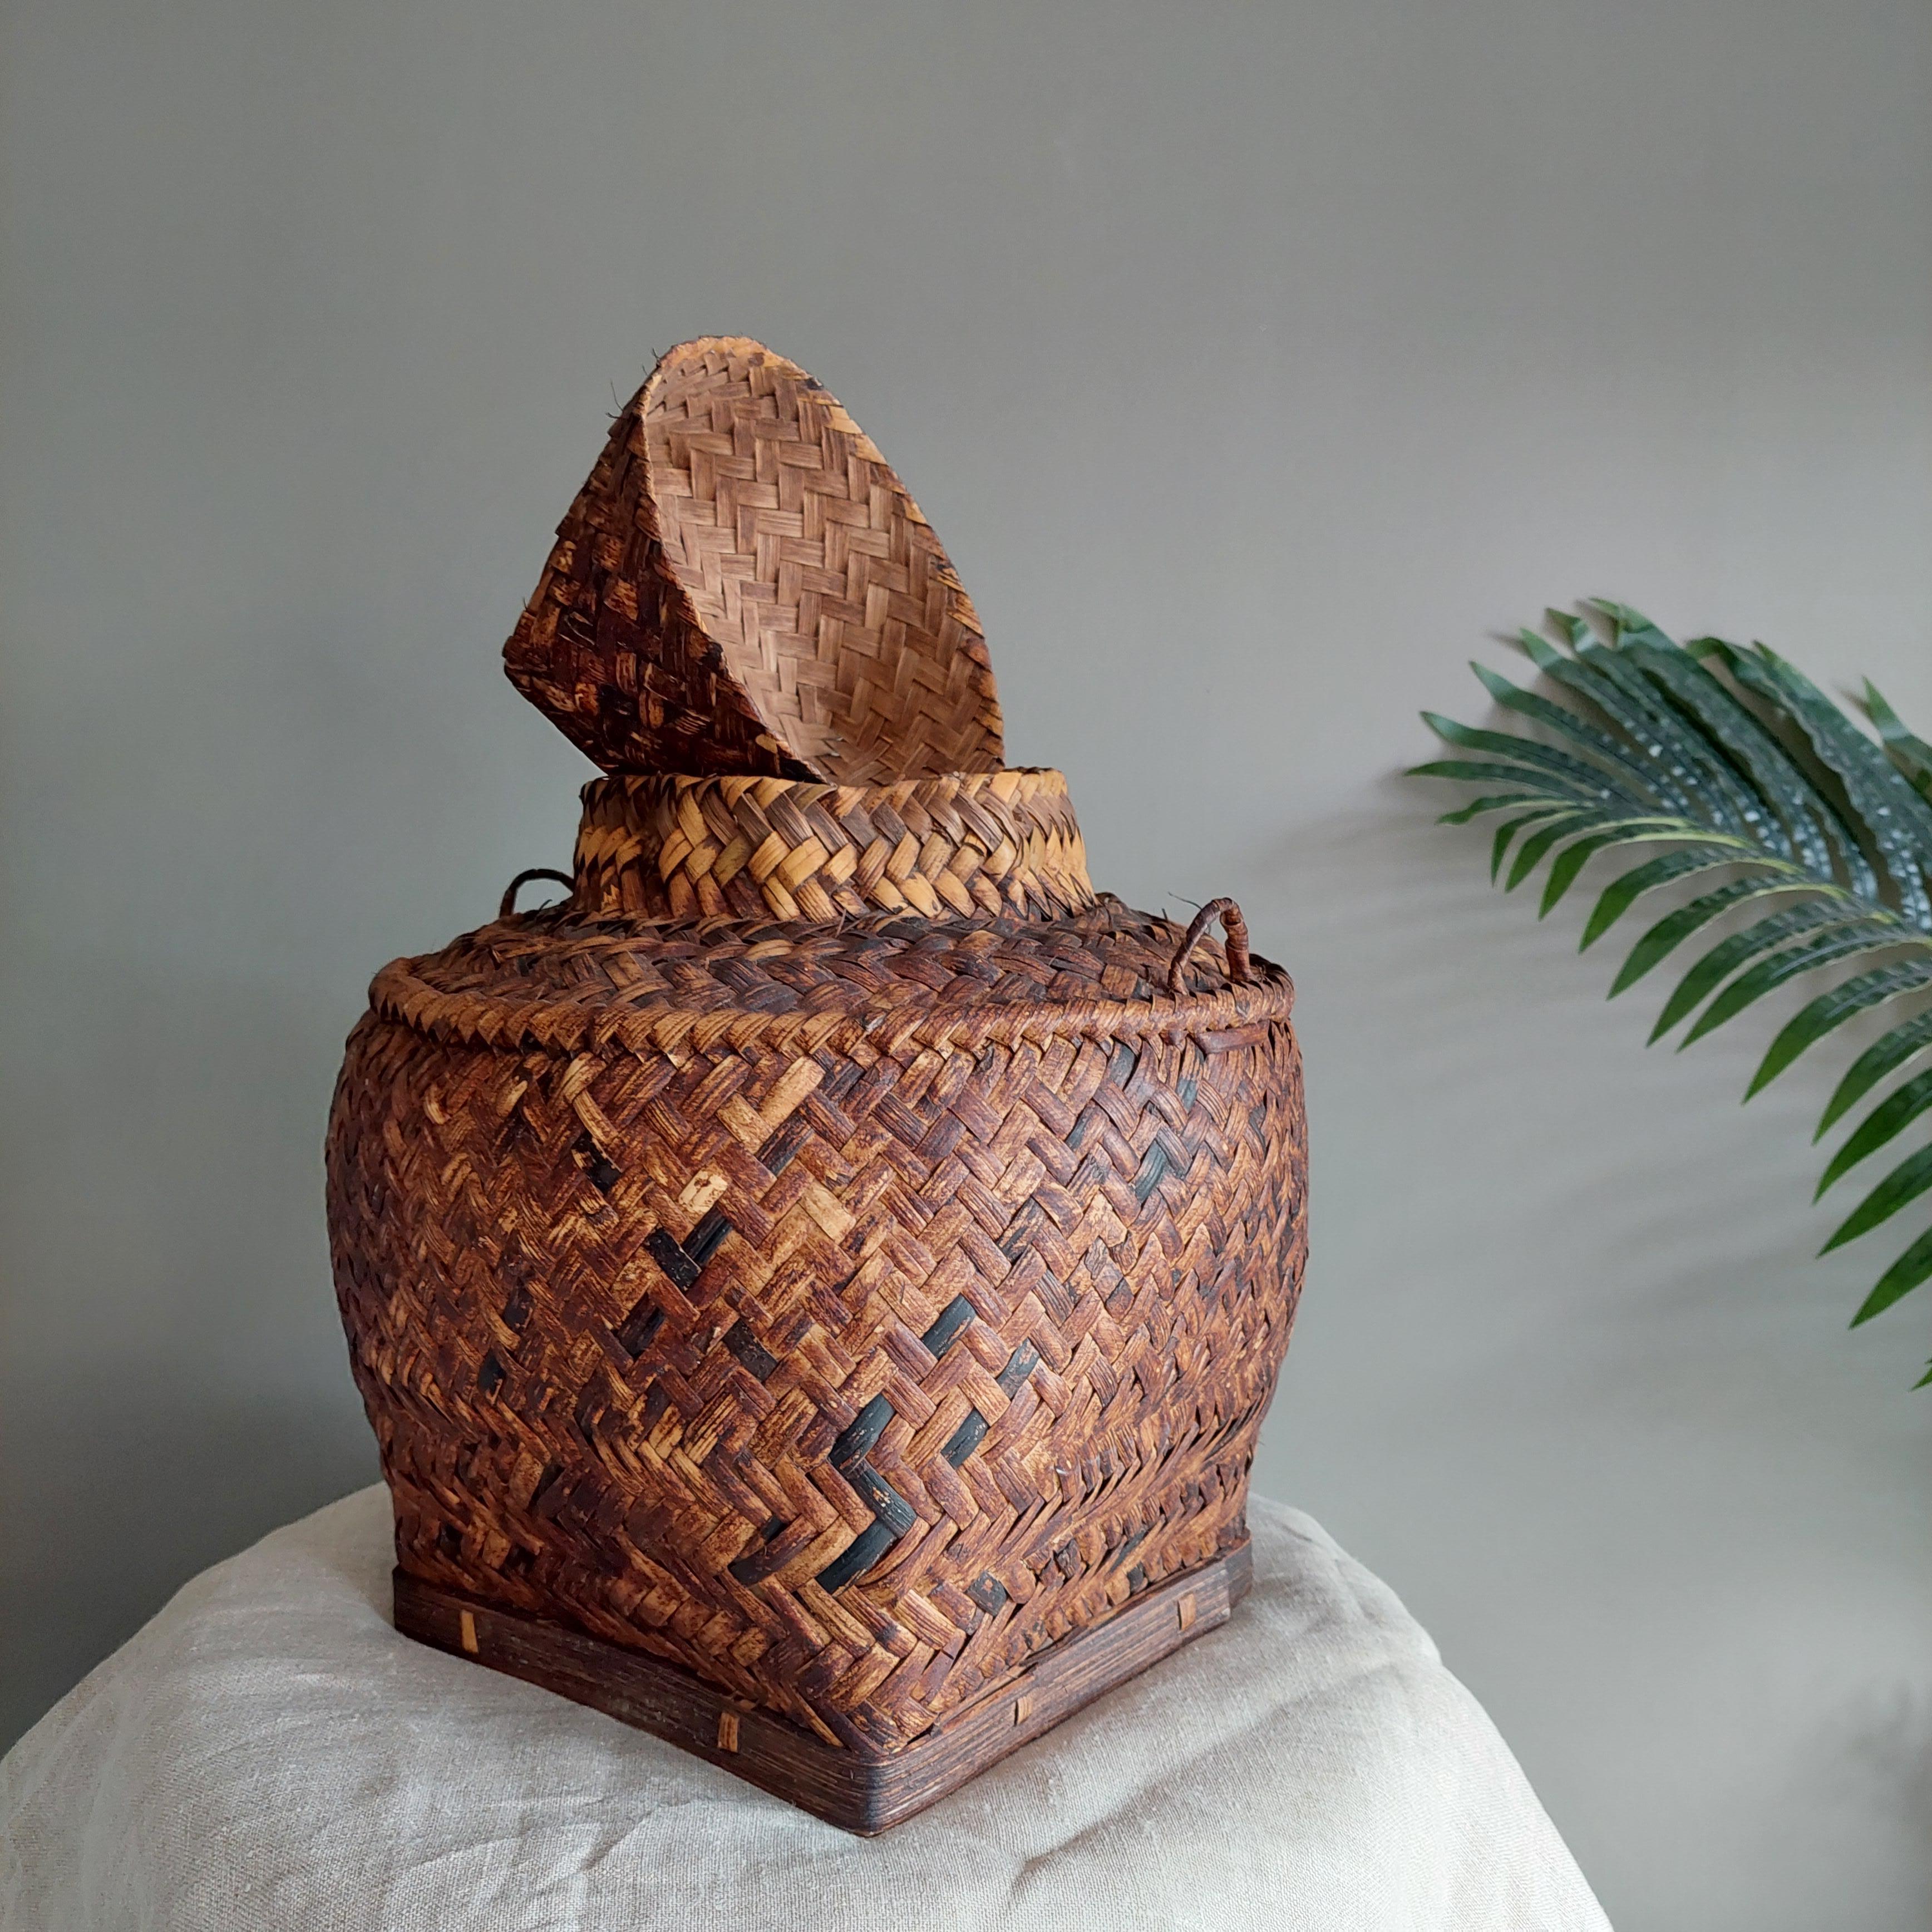 Vintage Asian basket with lid.
Lovely herringbone pattern rattan basket.

This gorgeous, middle sized handwoven rice storage basket probably by the Tagbanwa tribe of Palawan of the Philippines boasts an attractive shape and squared lid. 
The